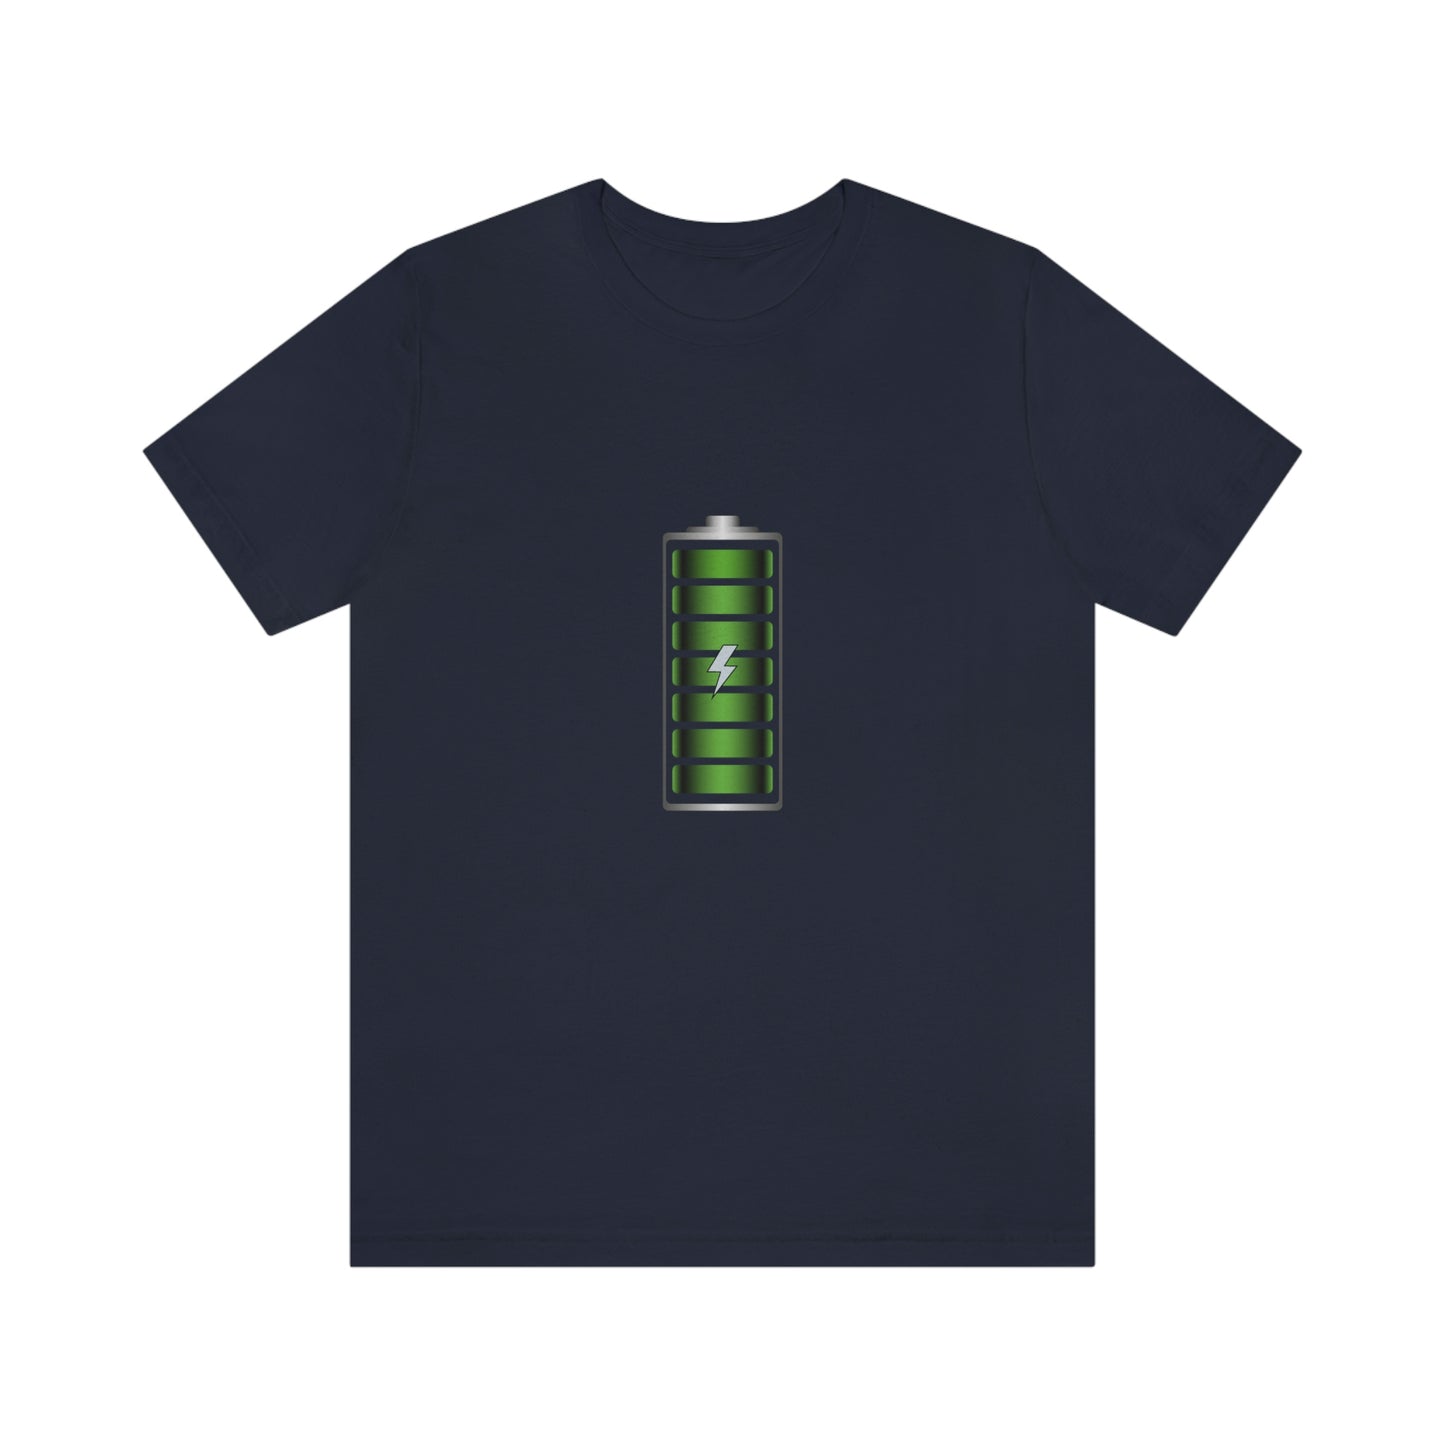 Navy T-Shirt featuring a green and chrome 'battery' design from the TEQNEON Radioactive collection, named FULLY CHARGED